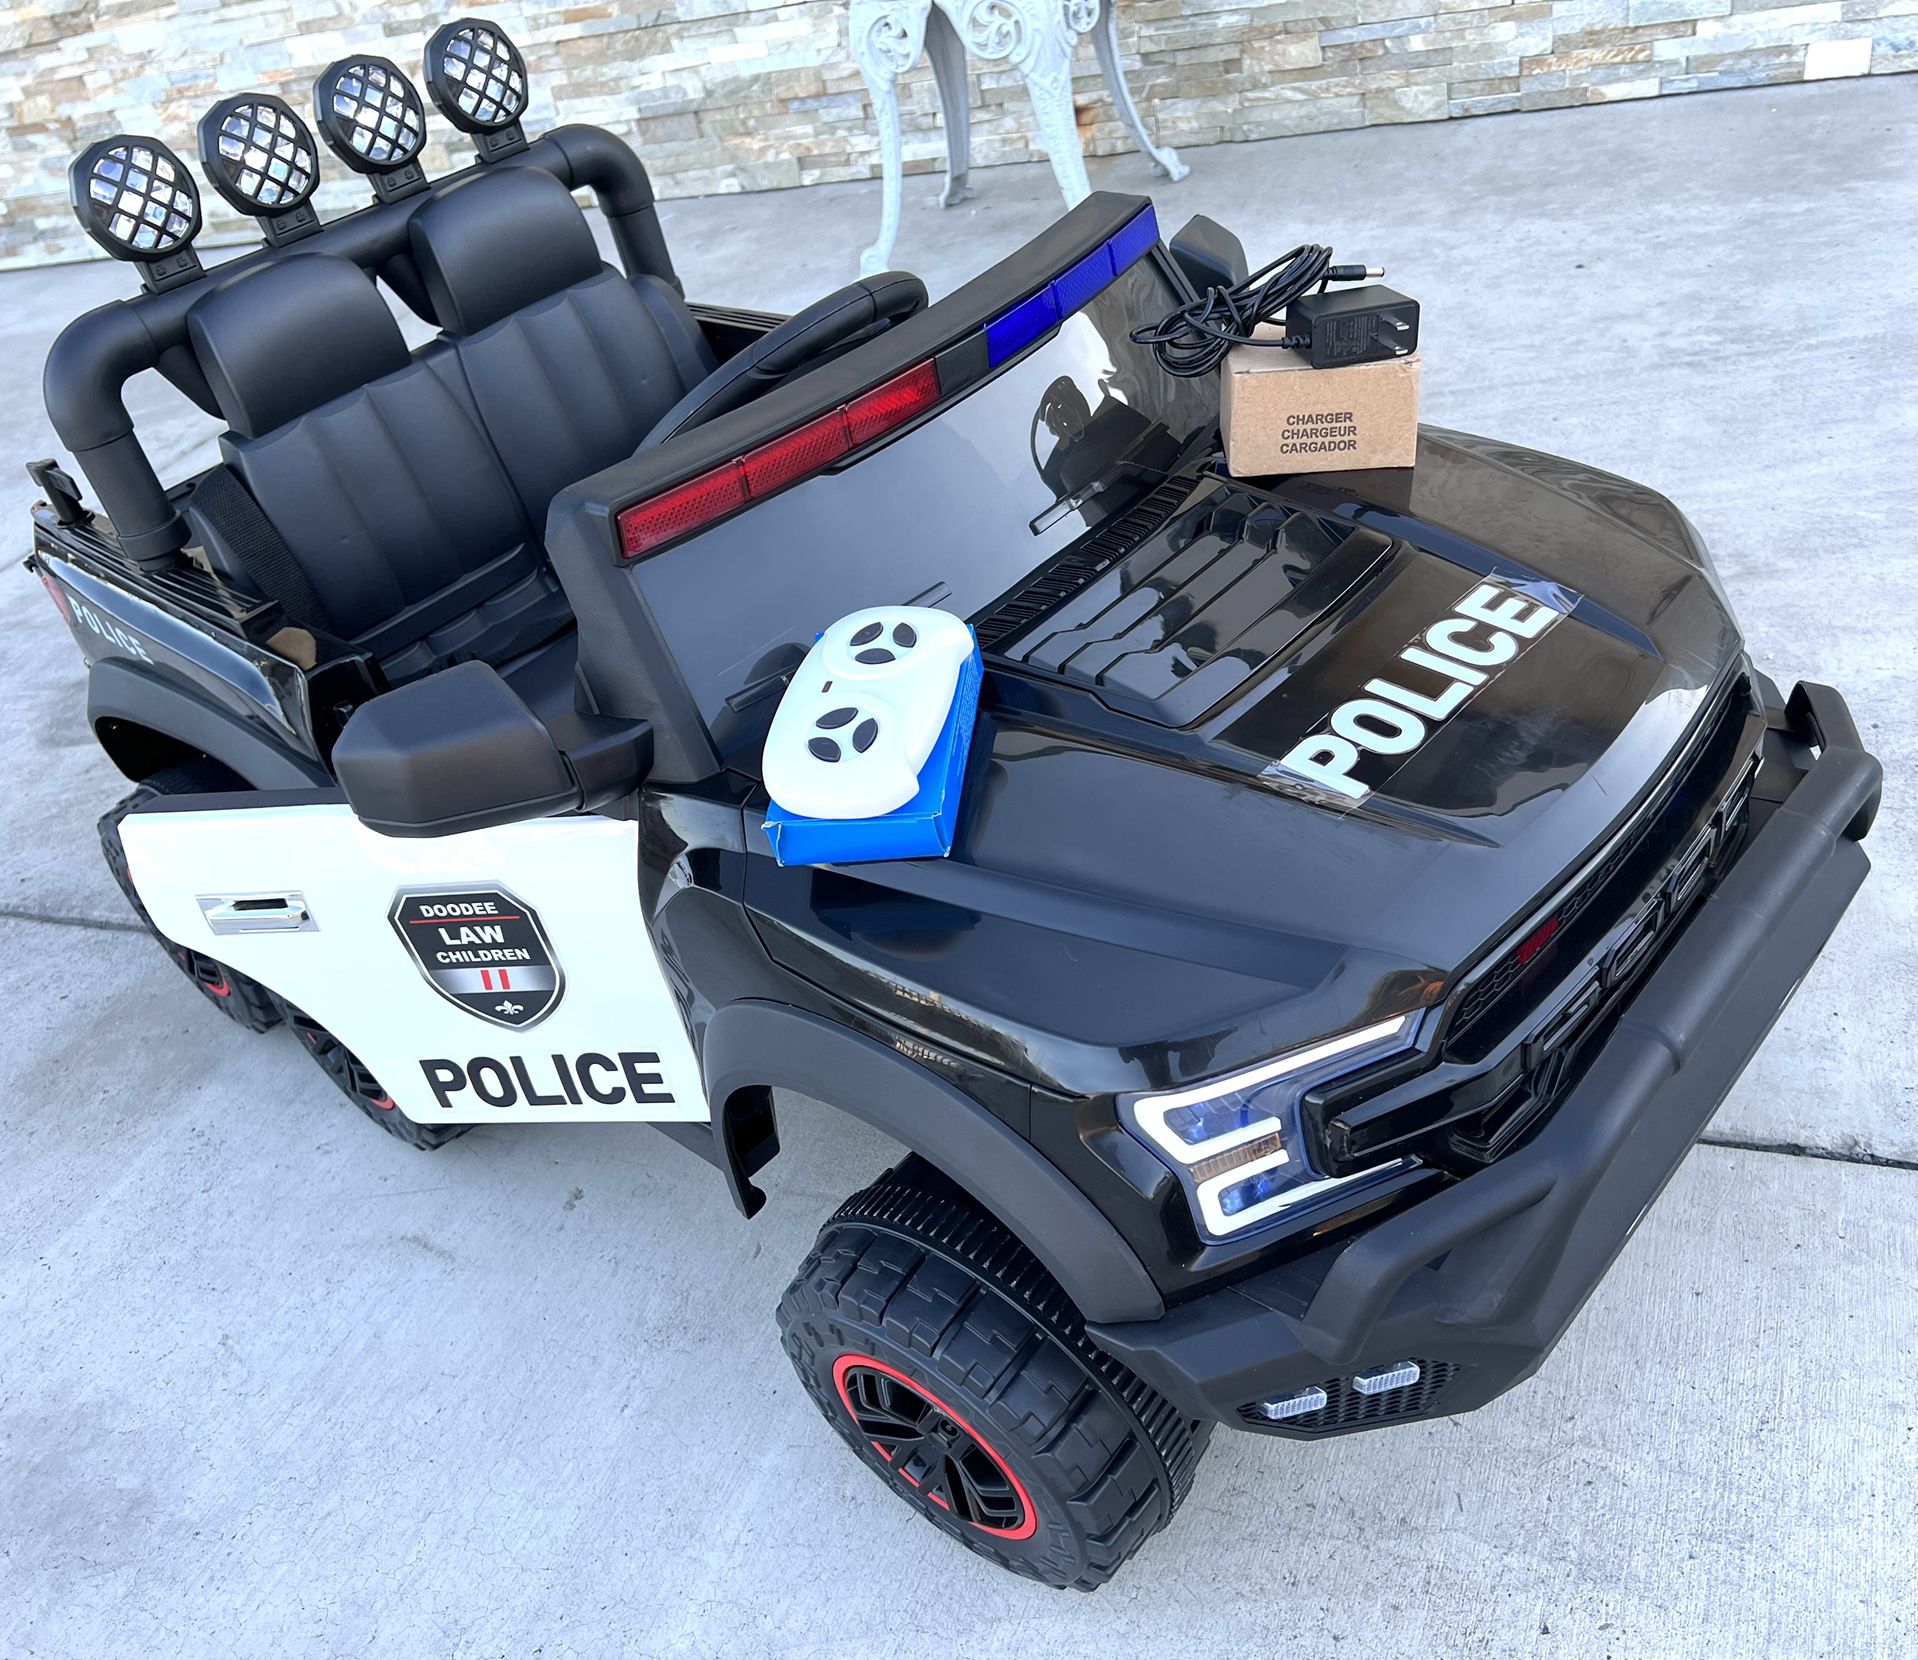 Police Truck 6x6 12v Remote Control Model Electric Kid Ride On Car Power Wheels with BLUETOOTH MUSIC - NEWEST MODEL Work with iPhone 📲 App